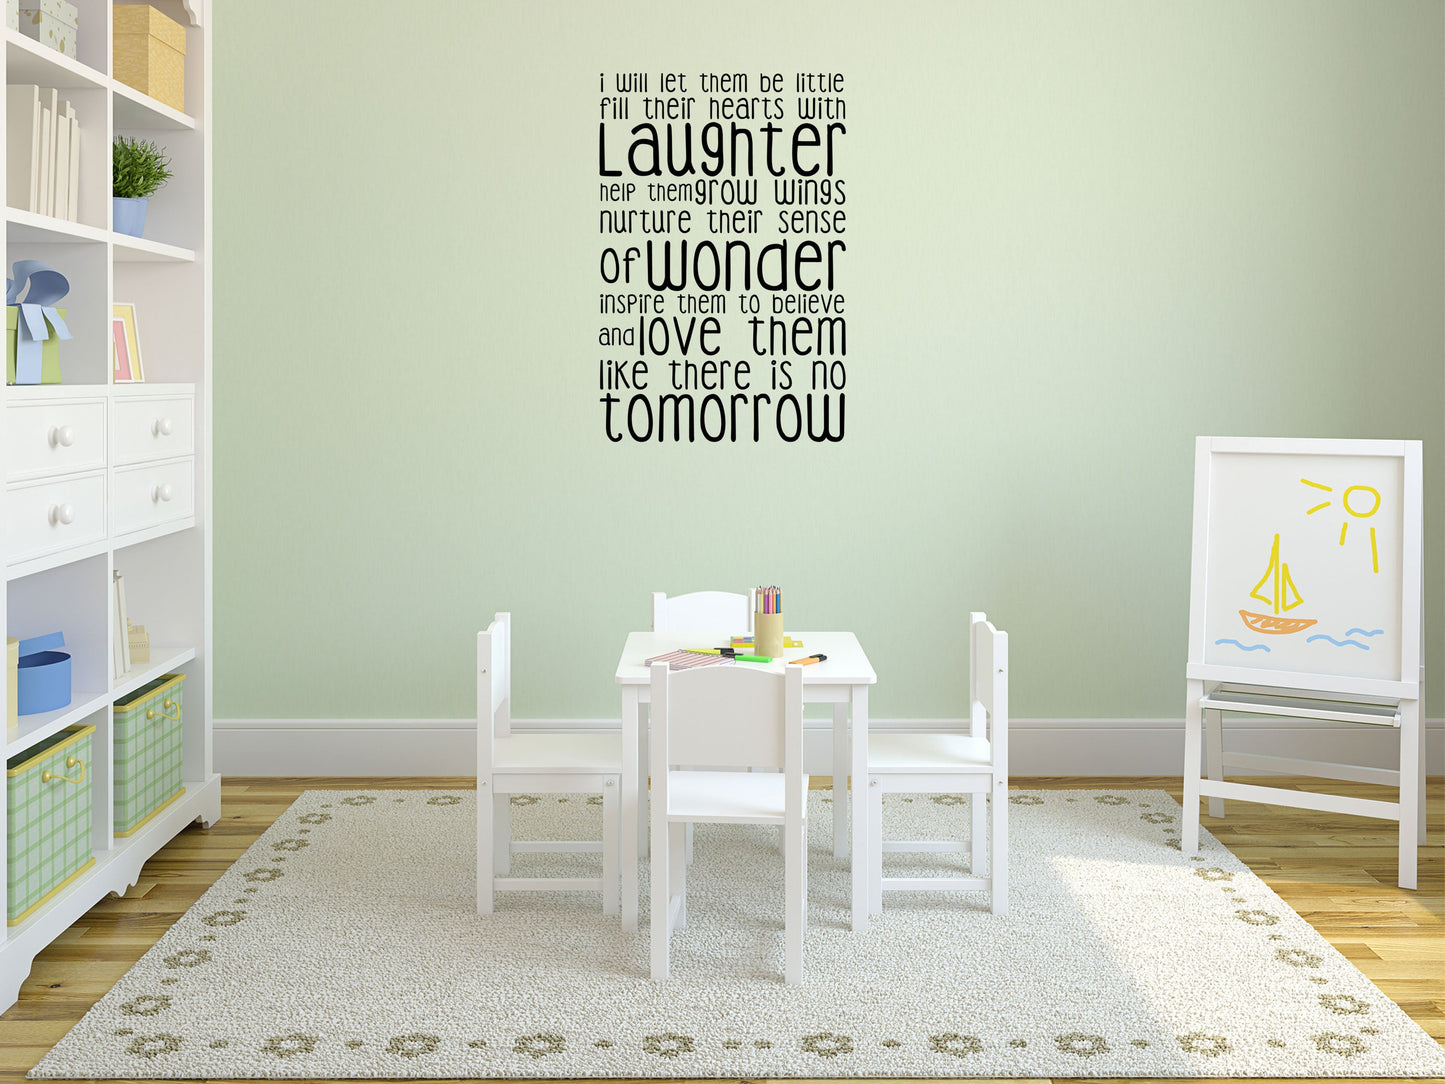 I Will Let Them Be Little - Inspirational Wall Decals Vinyl Wall Decal Inspirational Wall Signs 